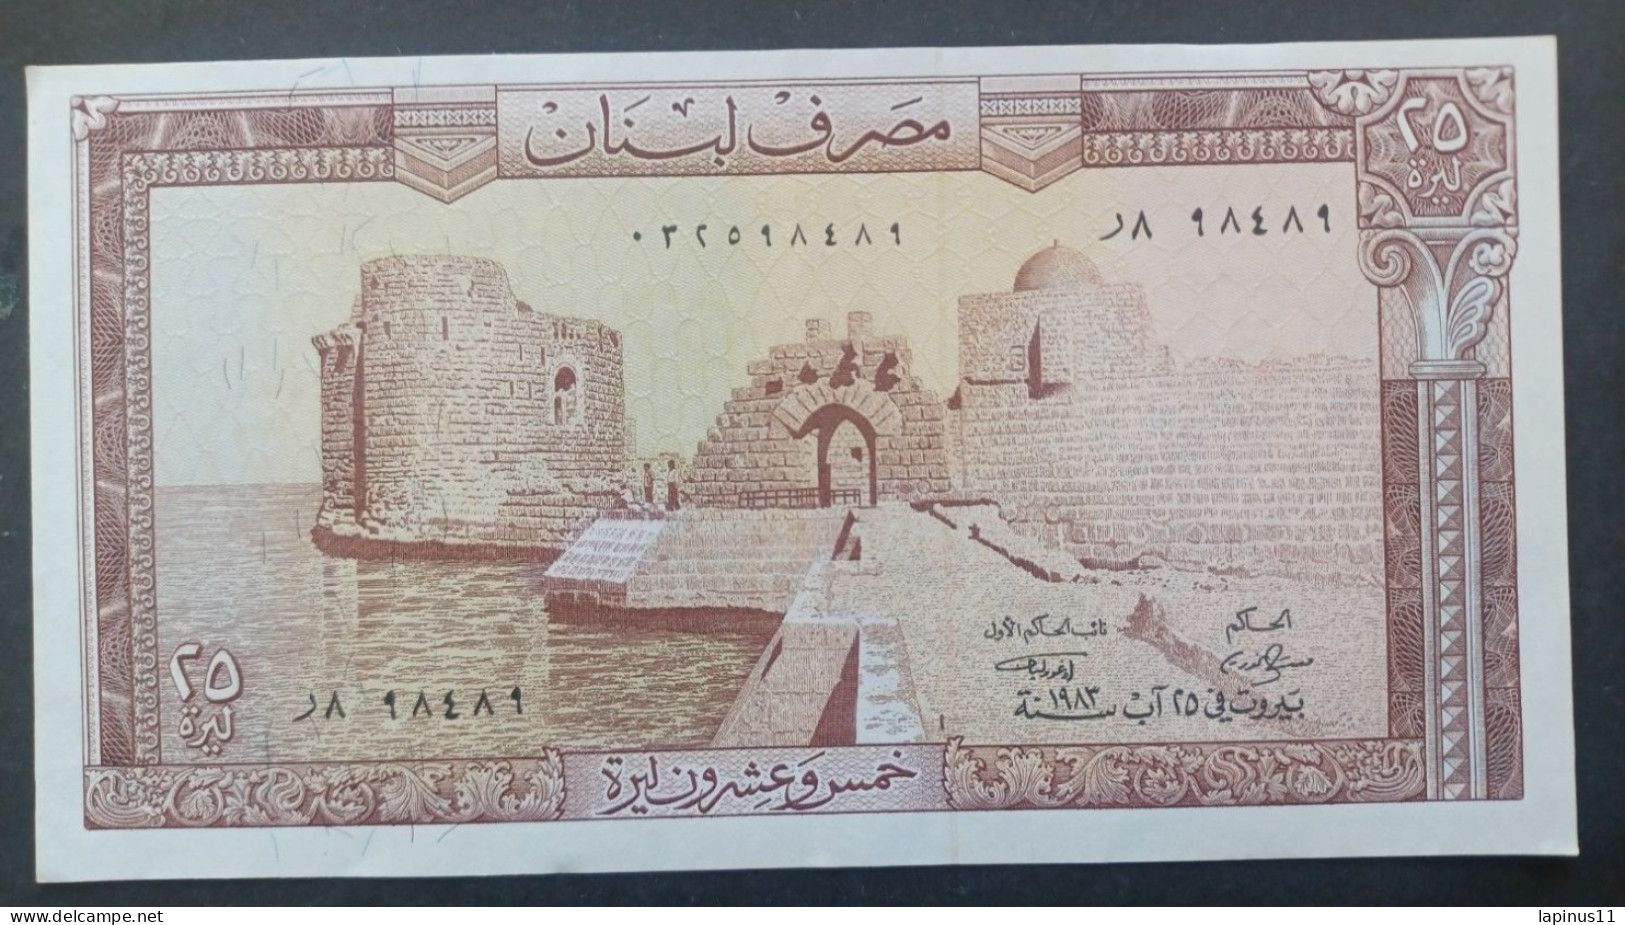 BANKNOTE LEBANON لبنان LIBAN 1973 25 LIVRES NOT CIRCULATED - Líbano